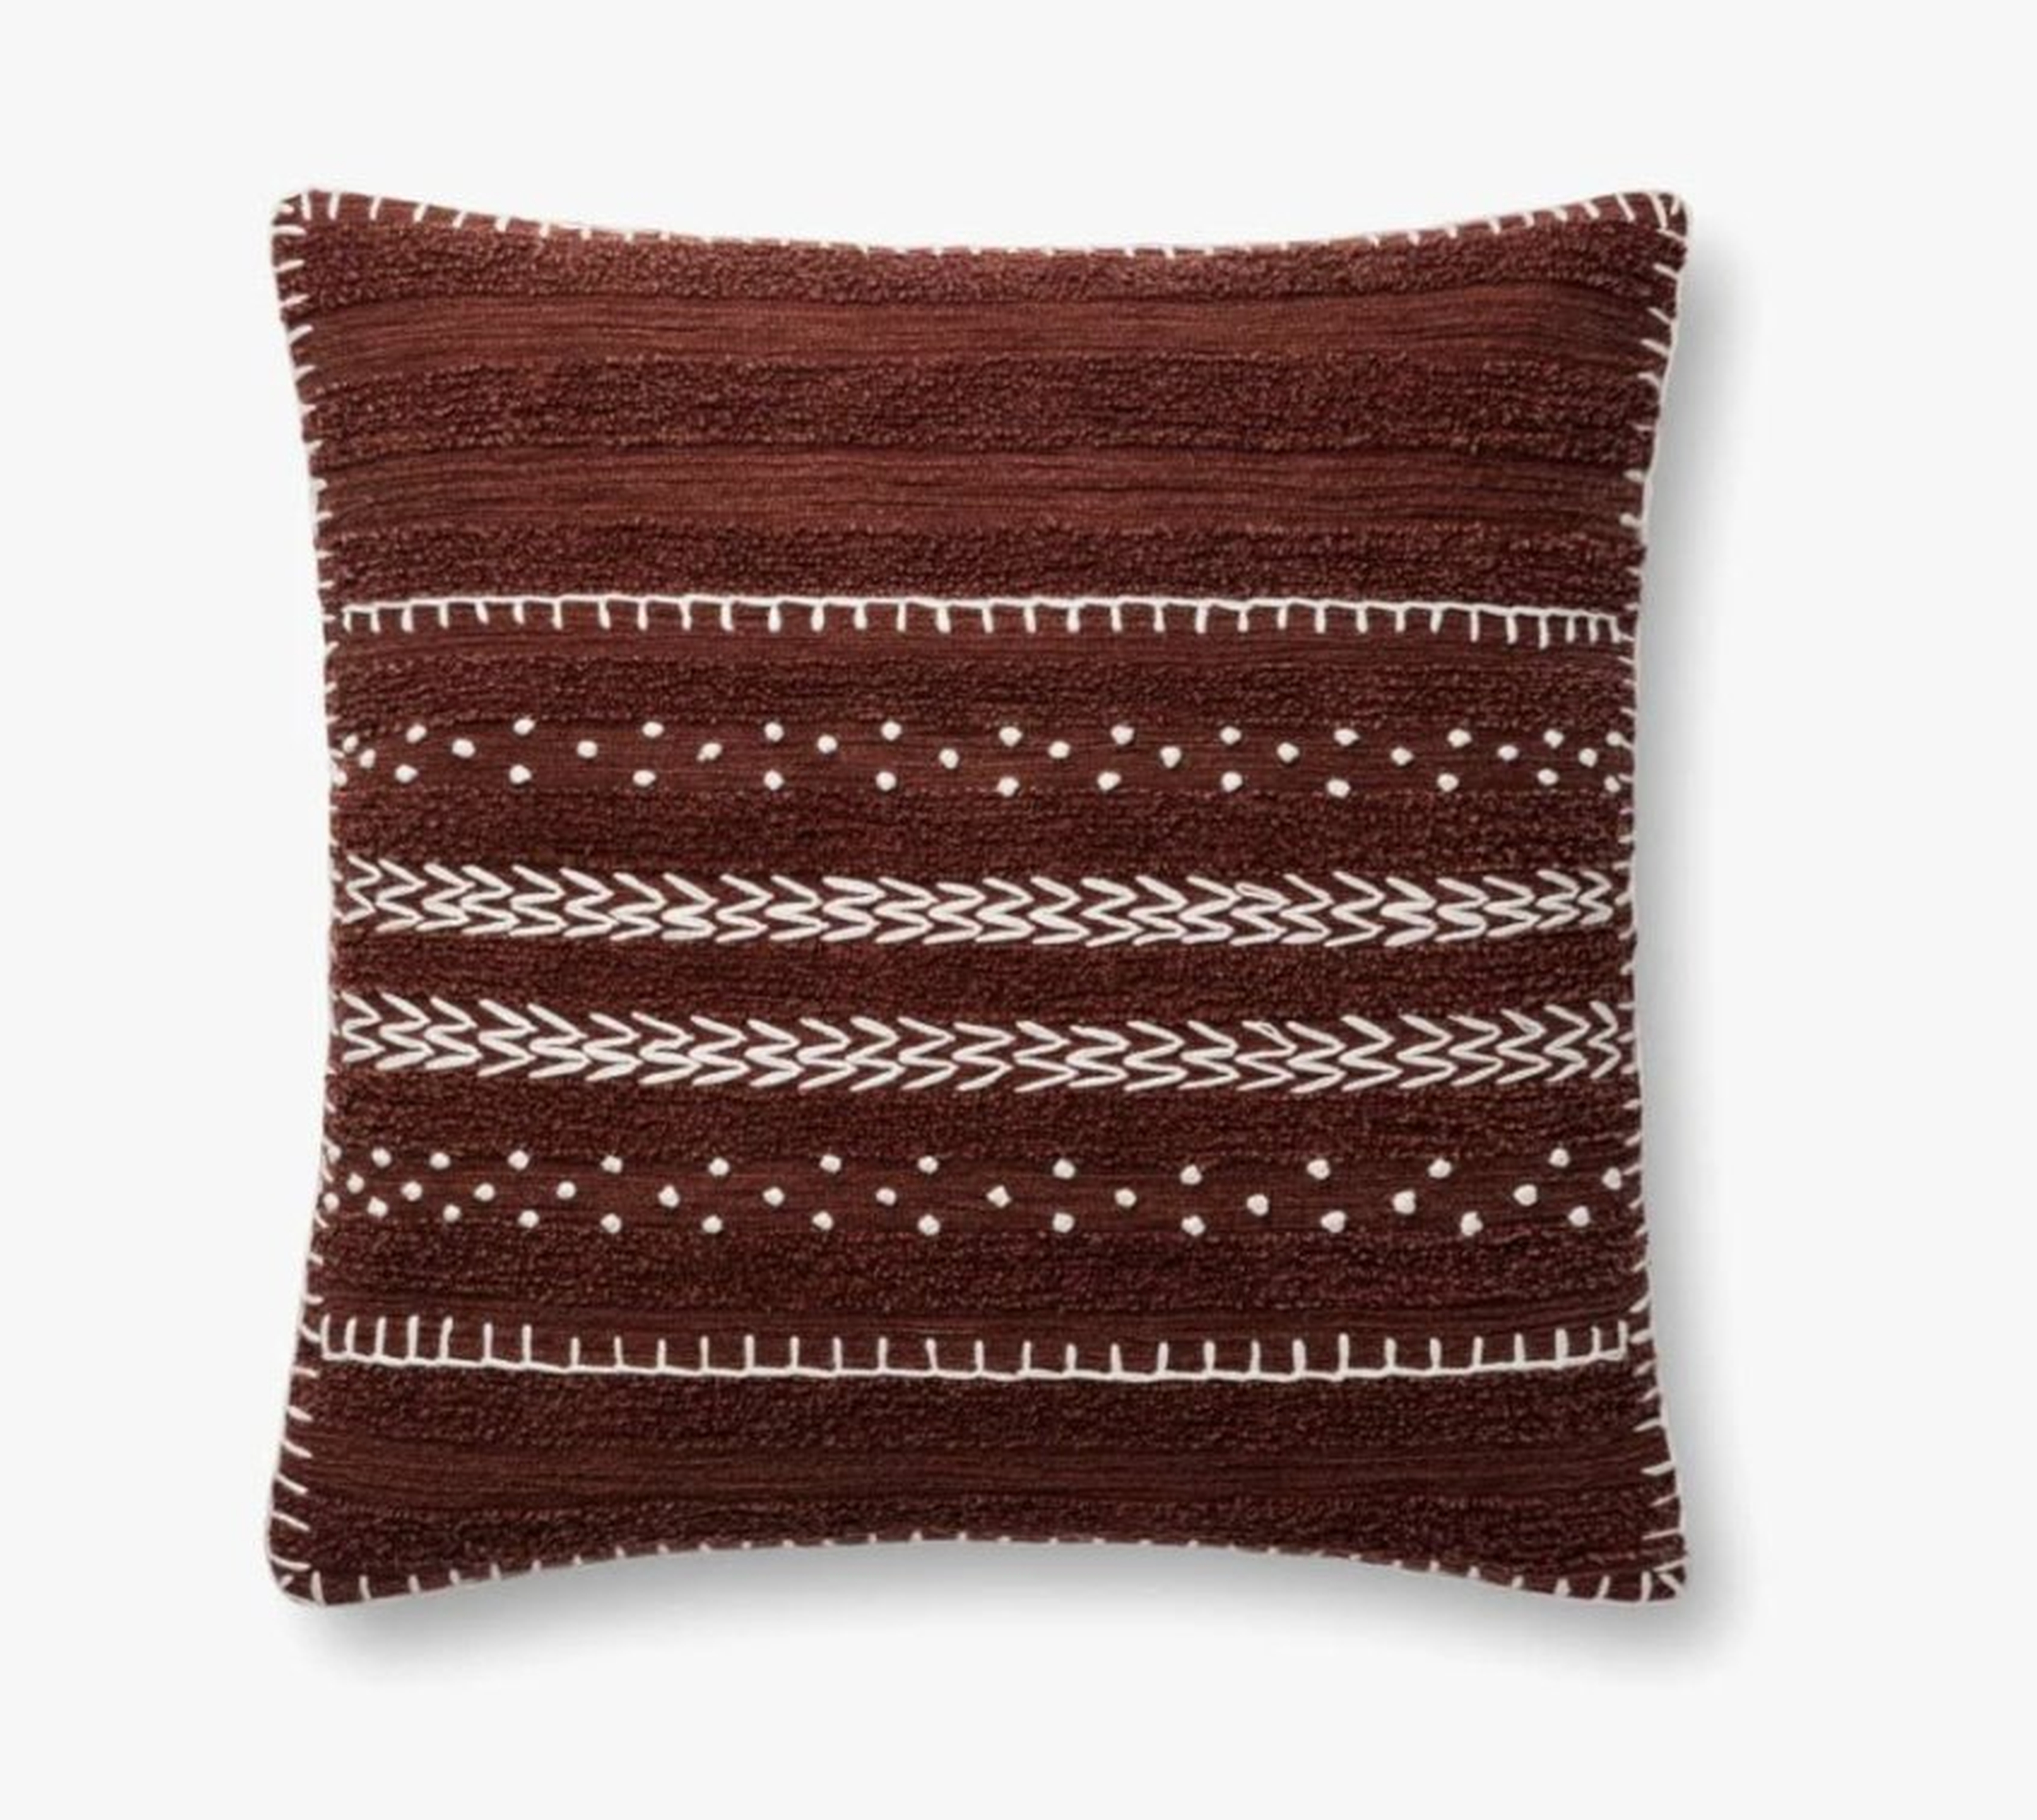 P4095 ED BURGUNDY, 22" Pillow with Polyester Insert - Loloi Rugs